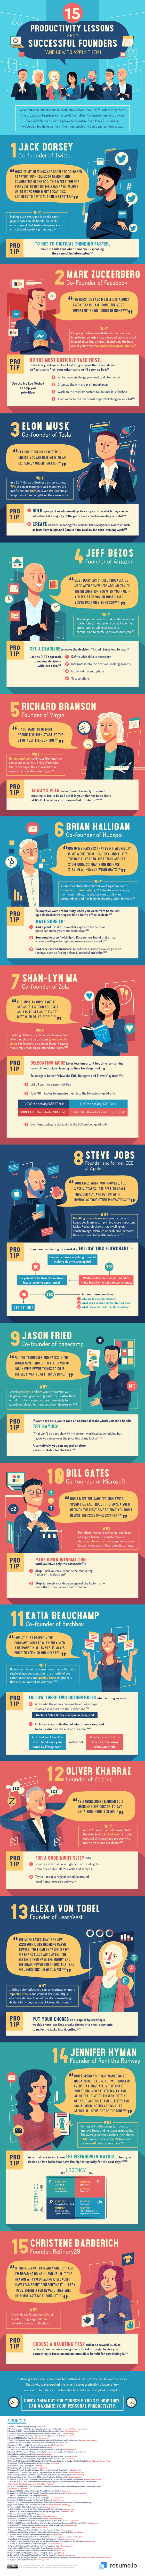 15-productivity-lessons-from-successful-founders-and-how-to-apply-them